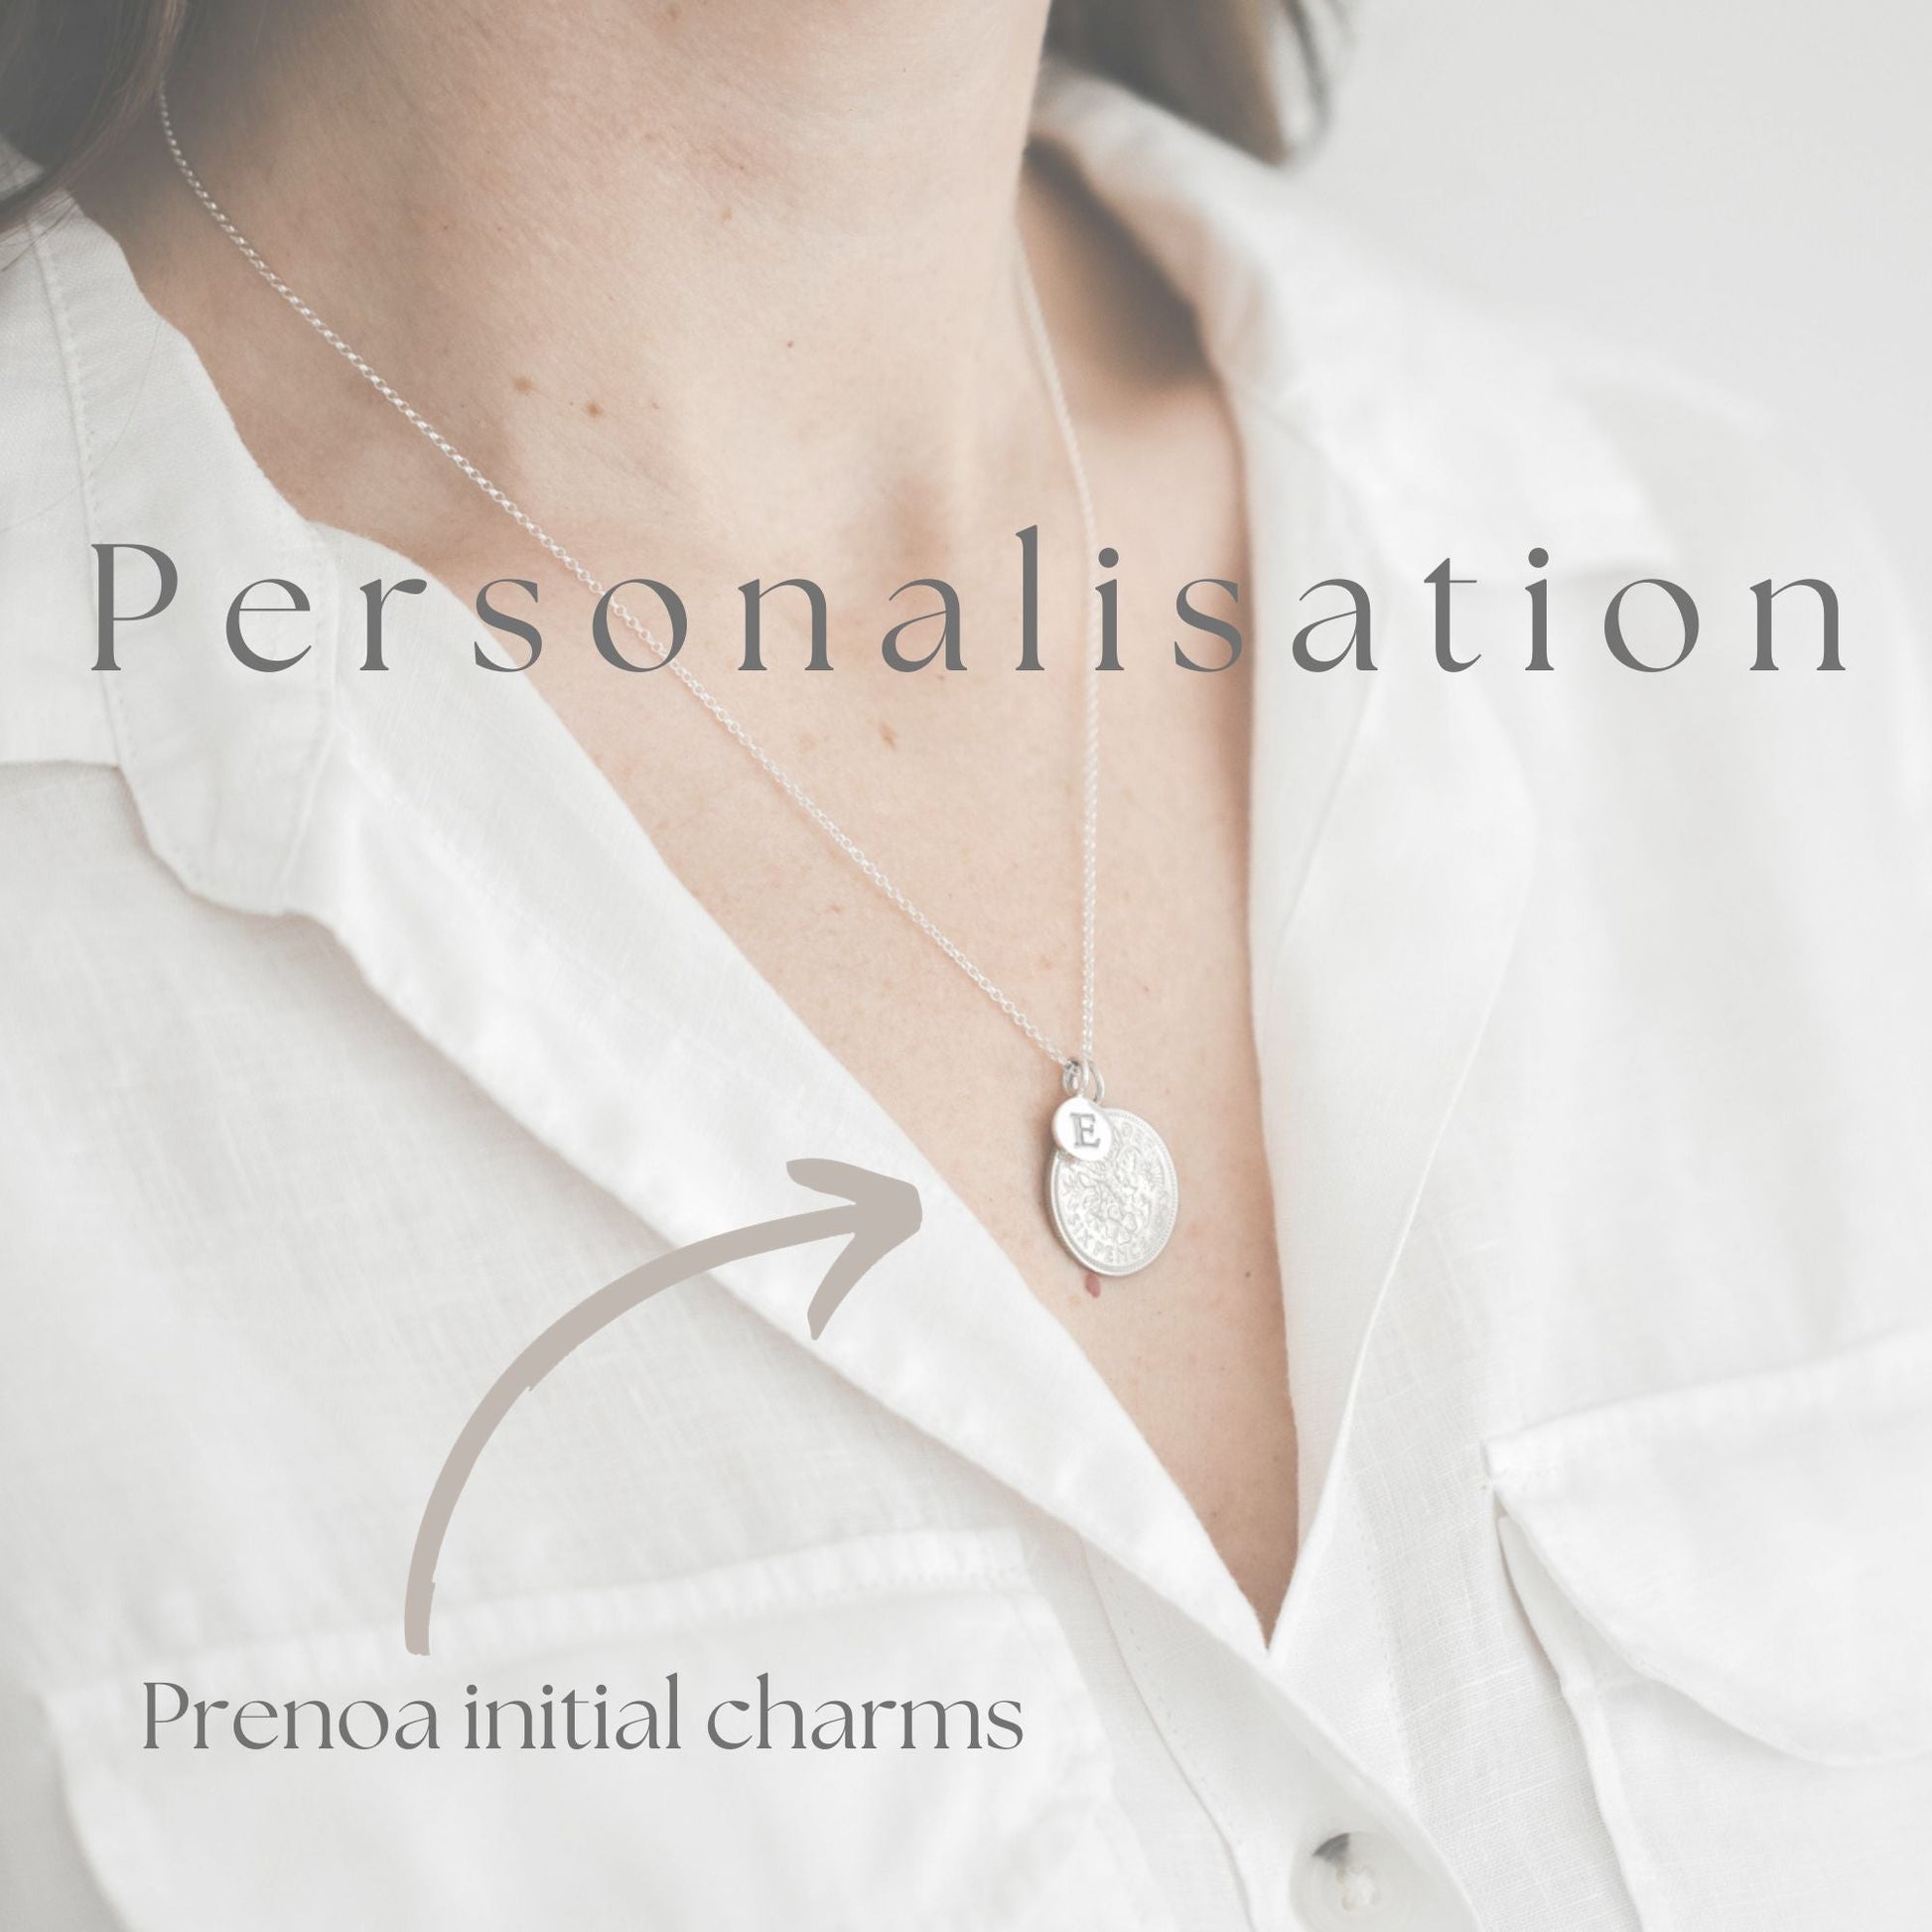 Make it personal with a Prenoa initial charm in silver or gold